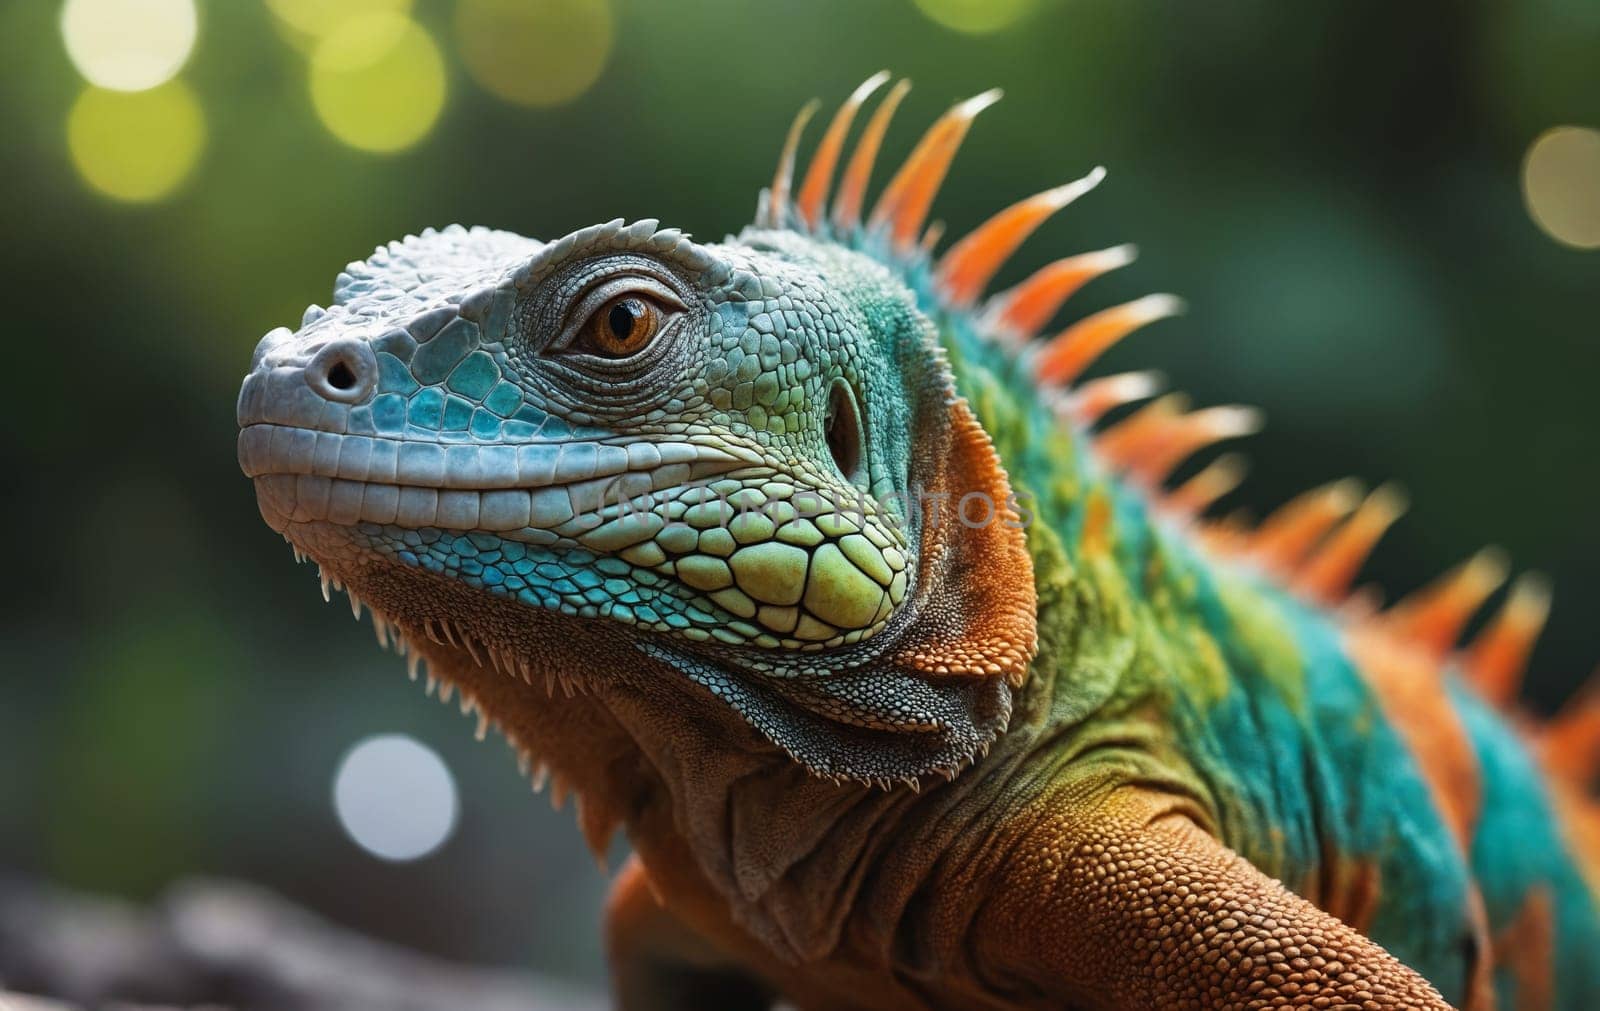 a close up of an iguana s face with a green and orange head by Andre1ns